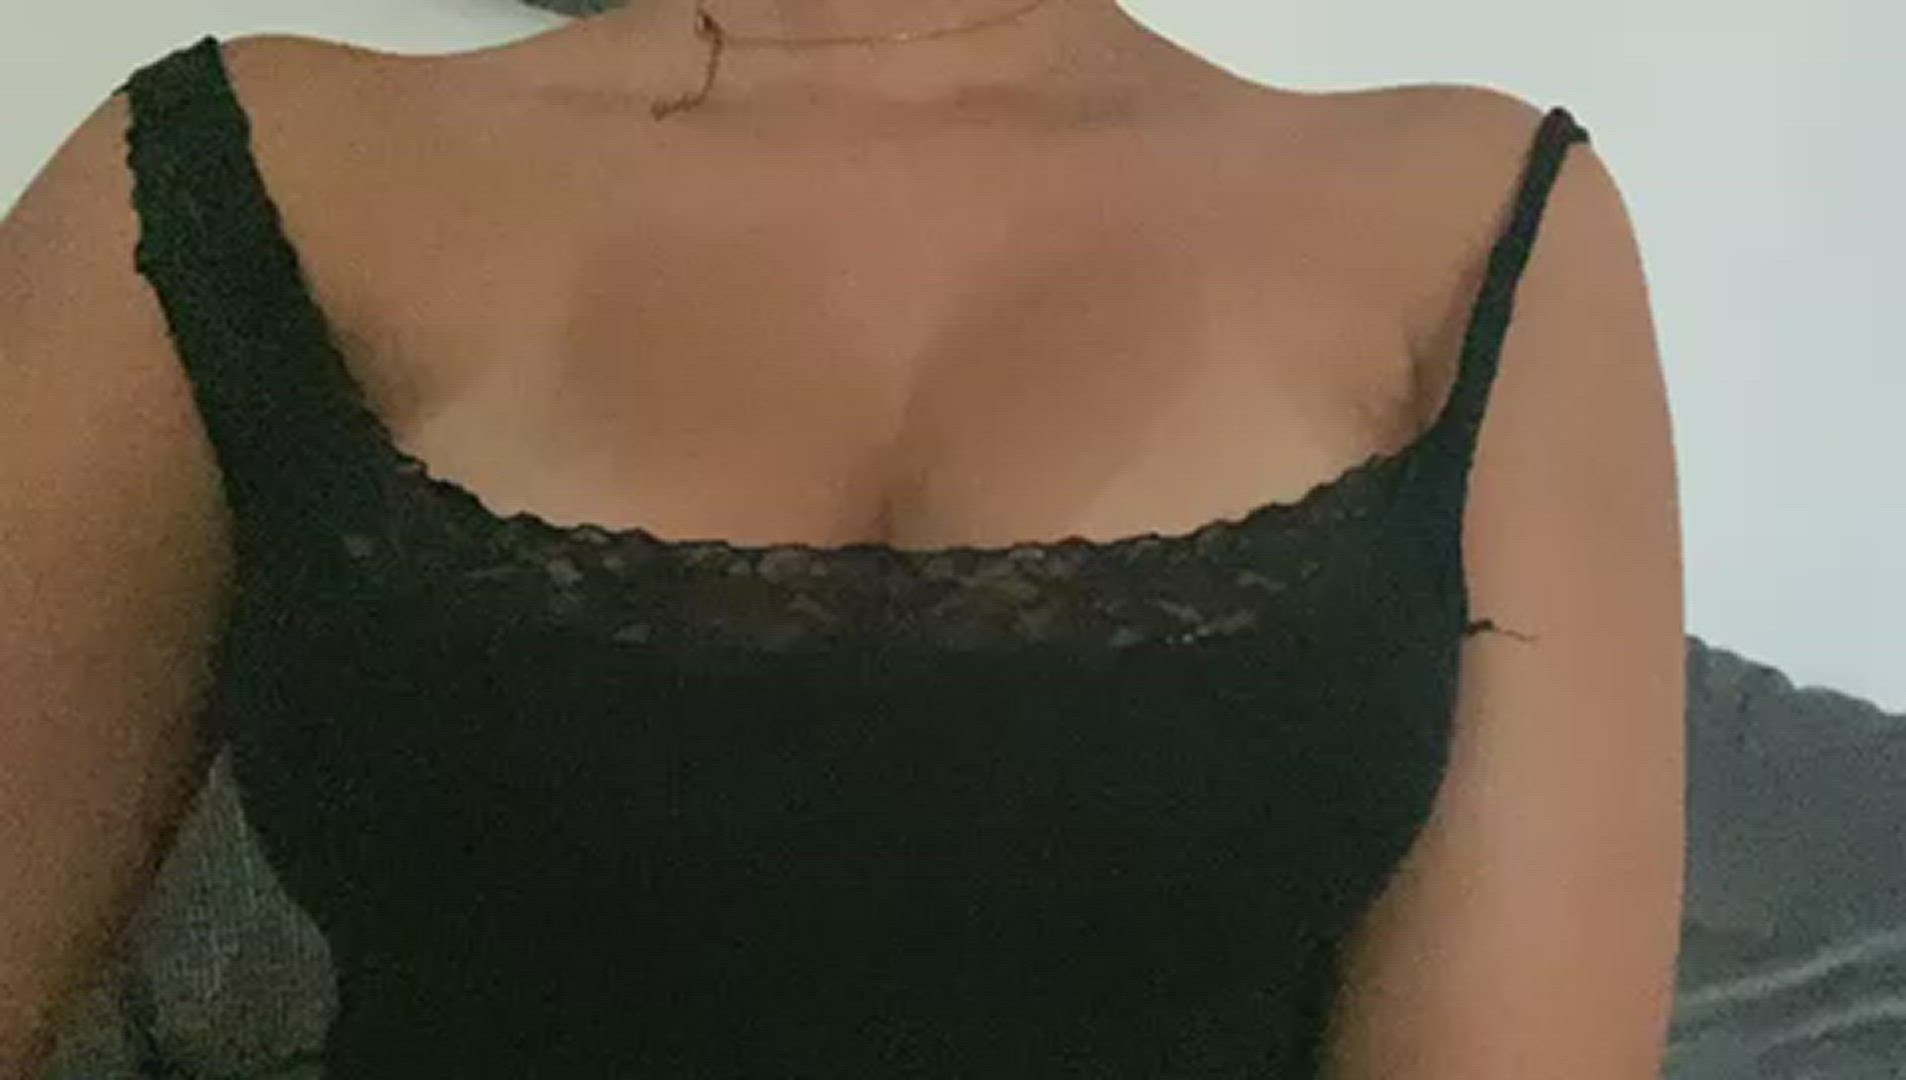 Boobs porn video with onlyfans model SarahSanchez69 <strong>@sarah_sanchez69</strong>